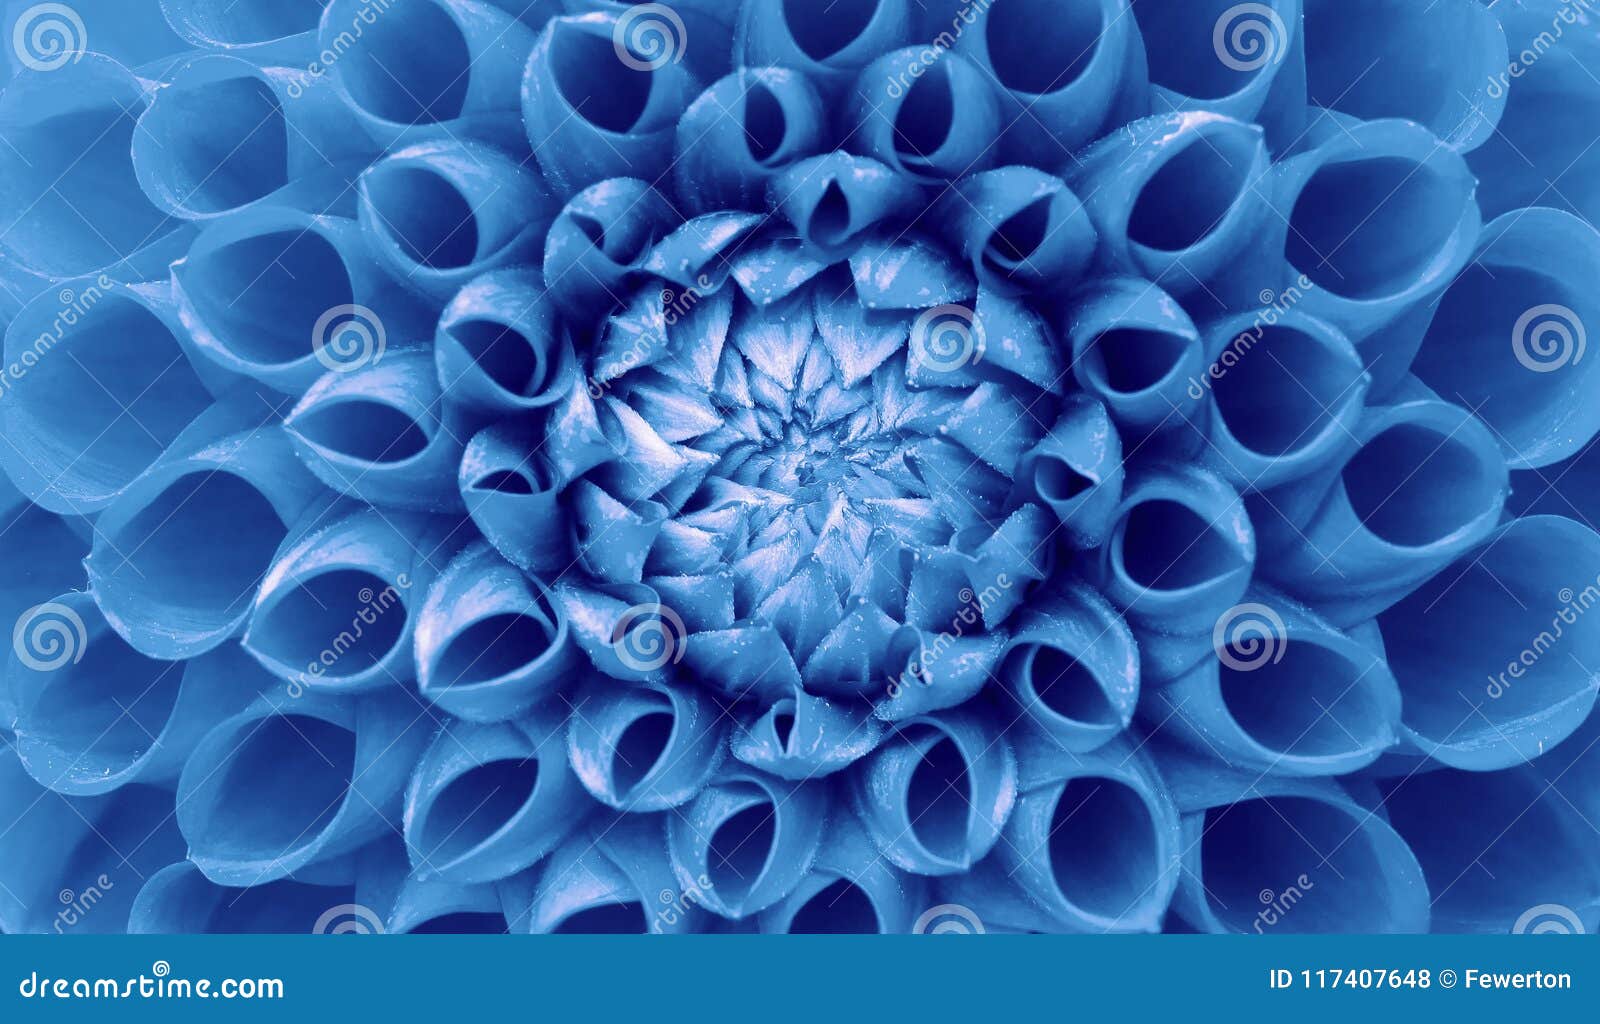 dahlia flower: light blue dahlia flower macro photo. picture in color emphasizing the intricate geometric pattern